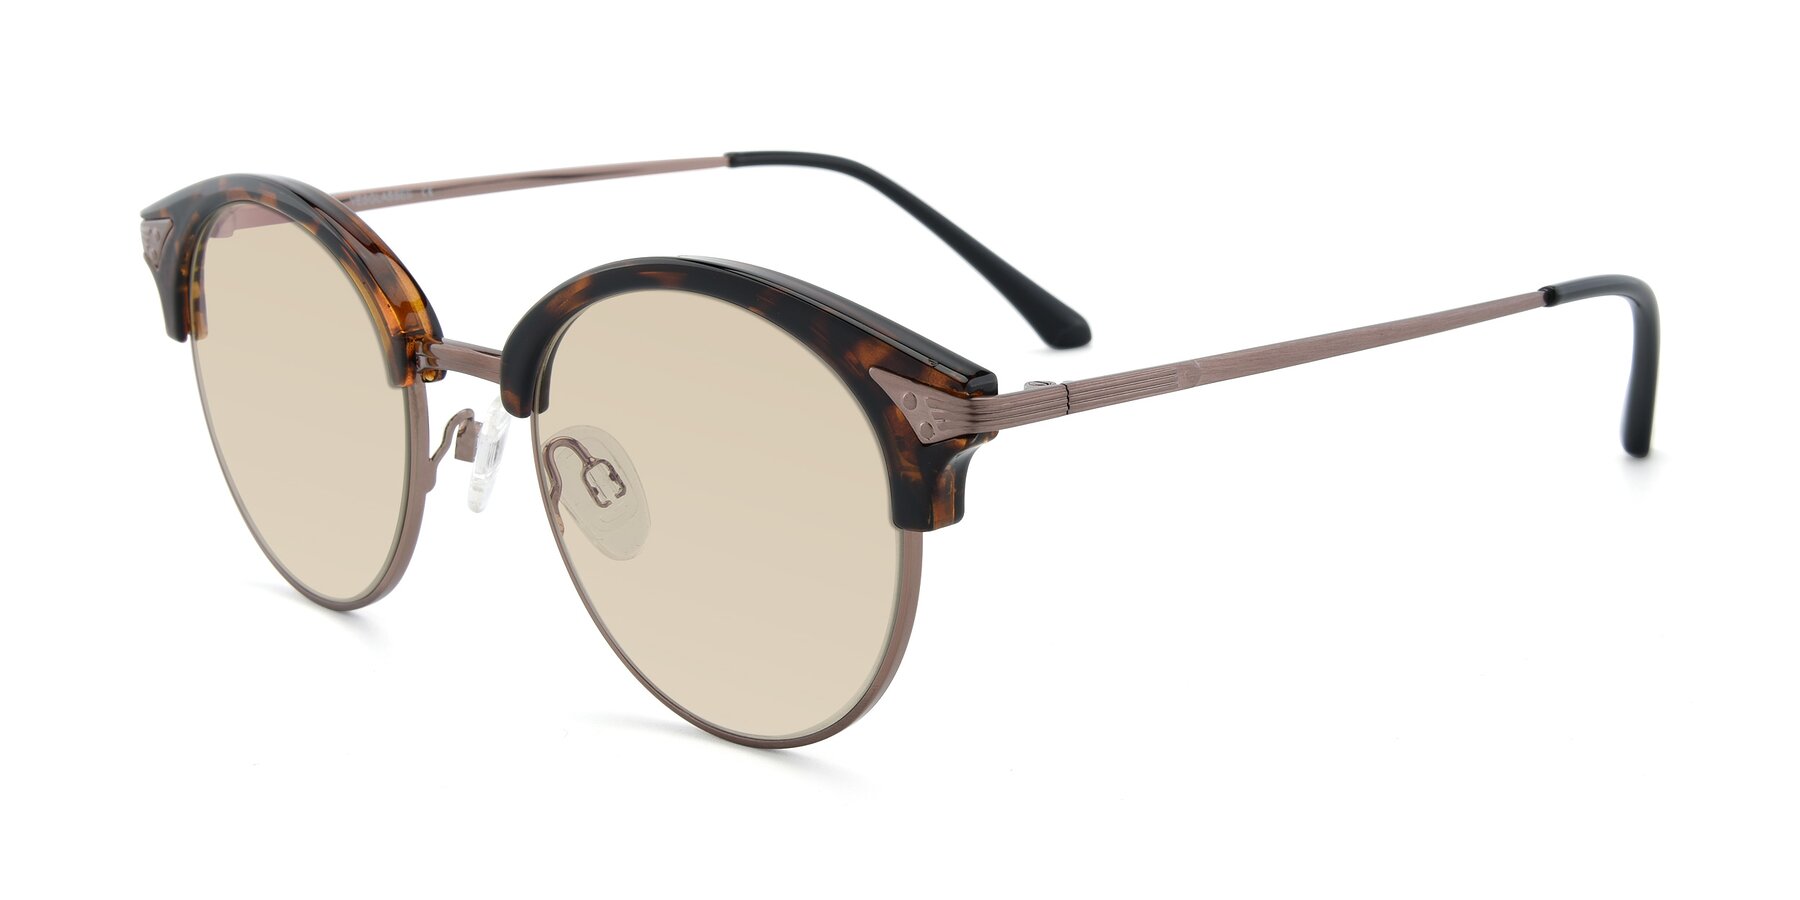 Angle of Hermione in Tortoise-Brown with Light Brown Tinted Lenses